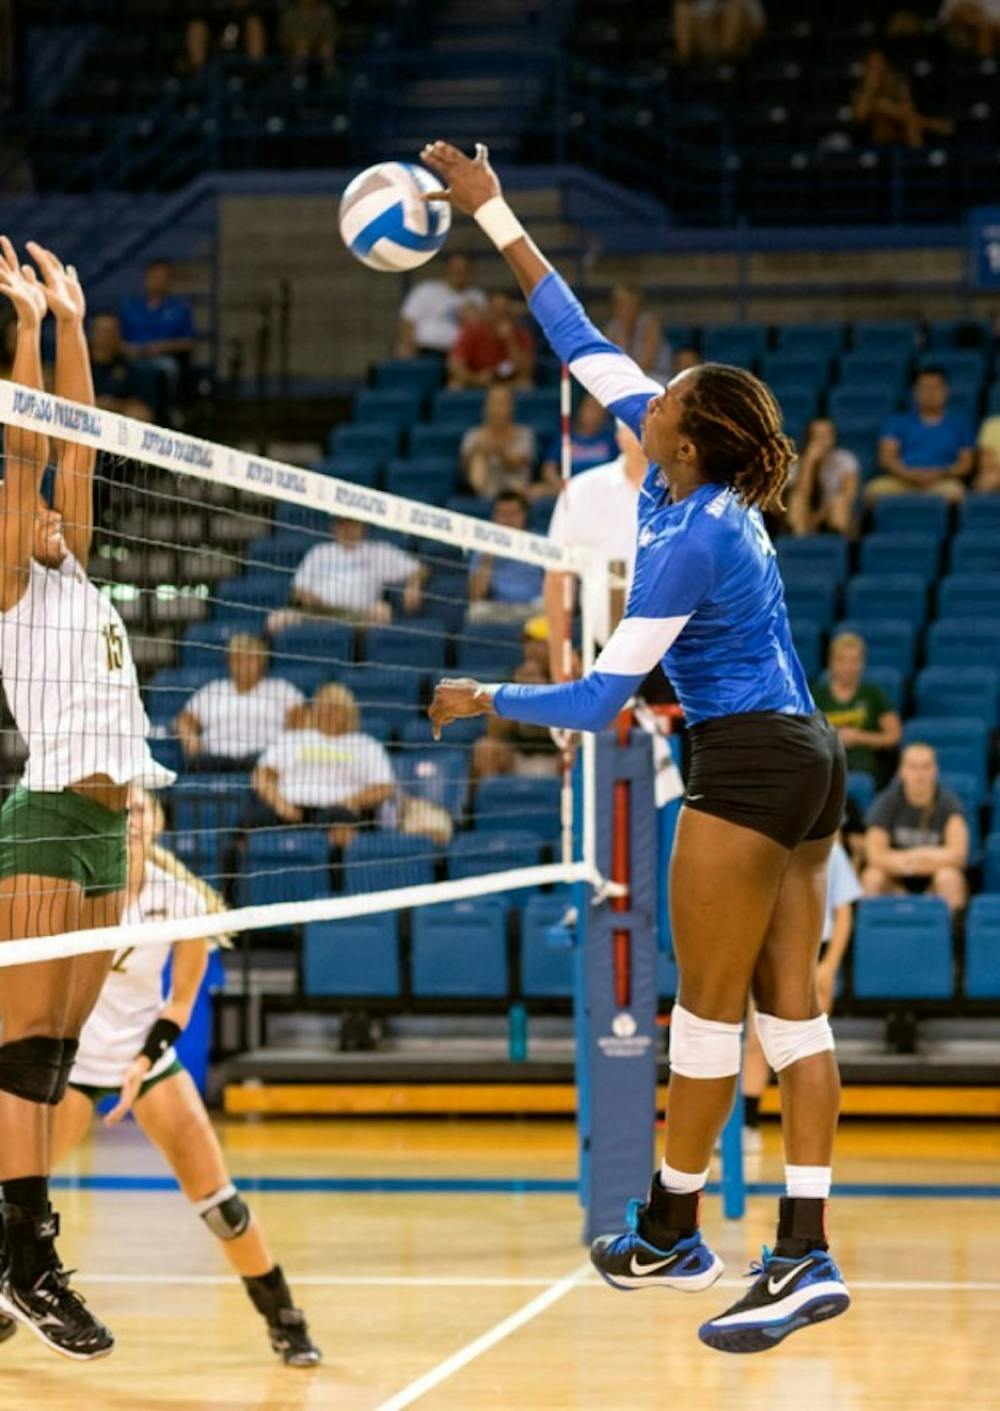 Junior middle blocker Amber Hatchett and the volleyball team won the USF Invite this weekend.
Wenyi Yang, The Spectrum